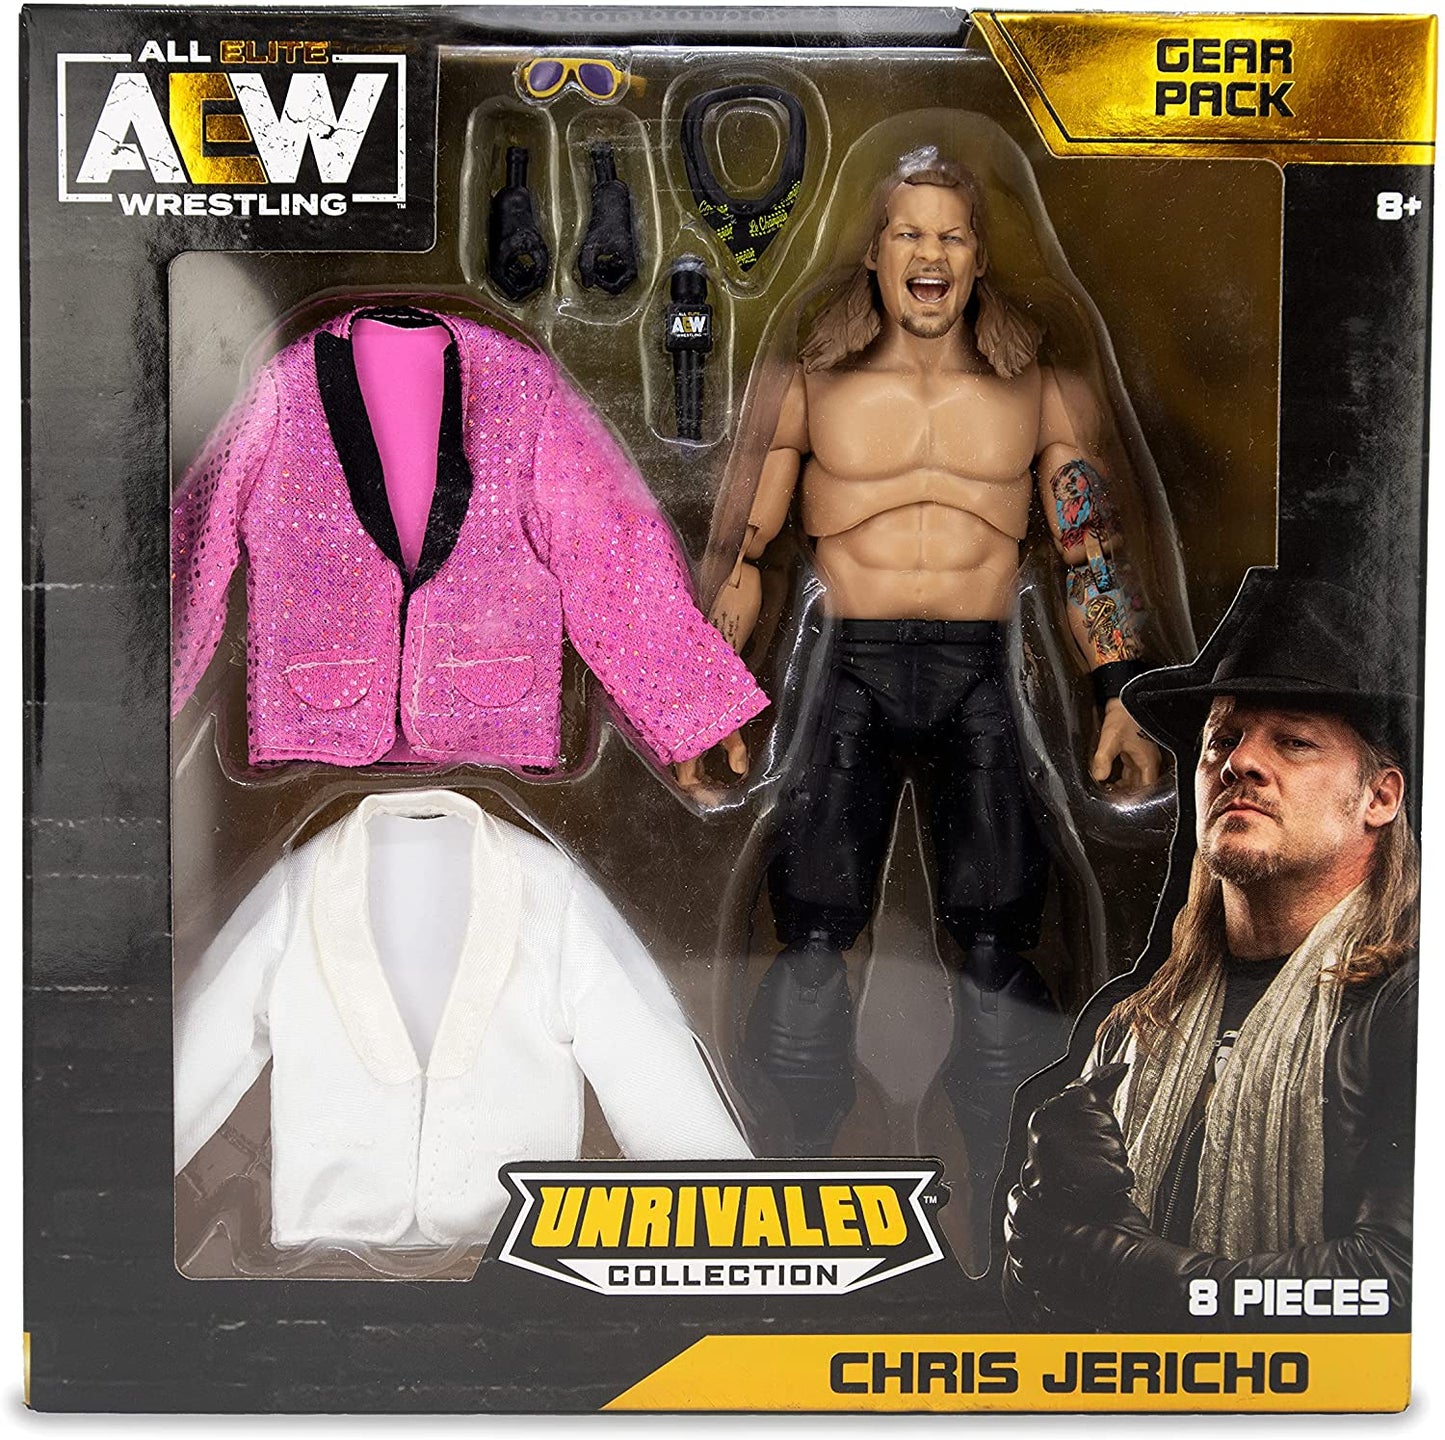 AEW Jazwares Unrivaled Collection Exclusive Chris Jericho Gear Pack